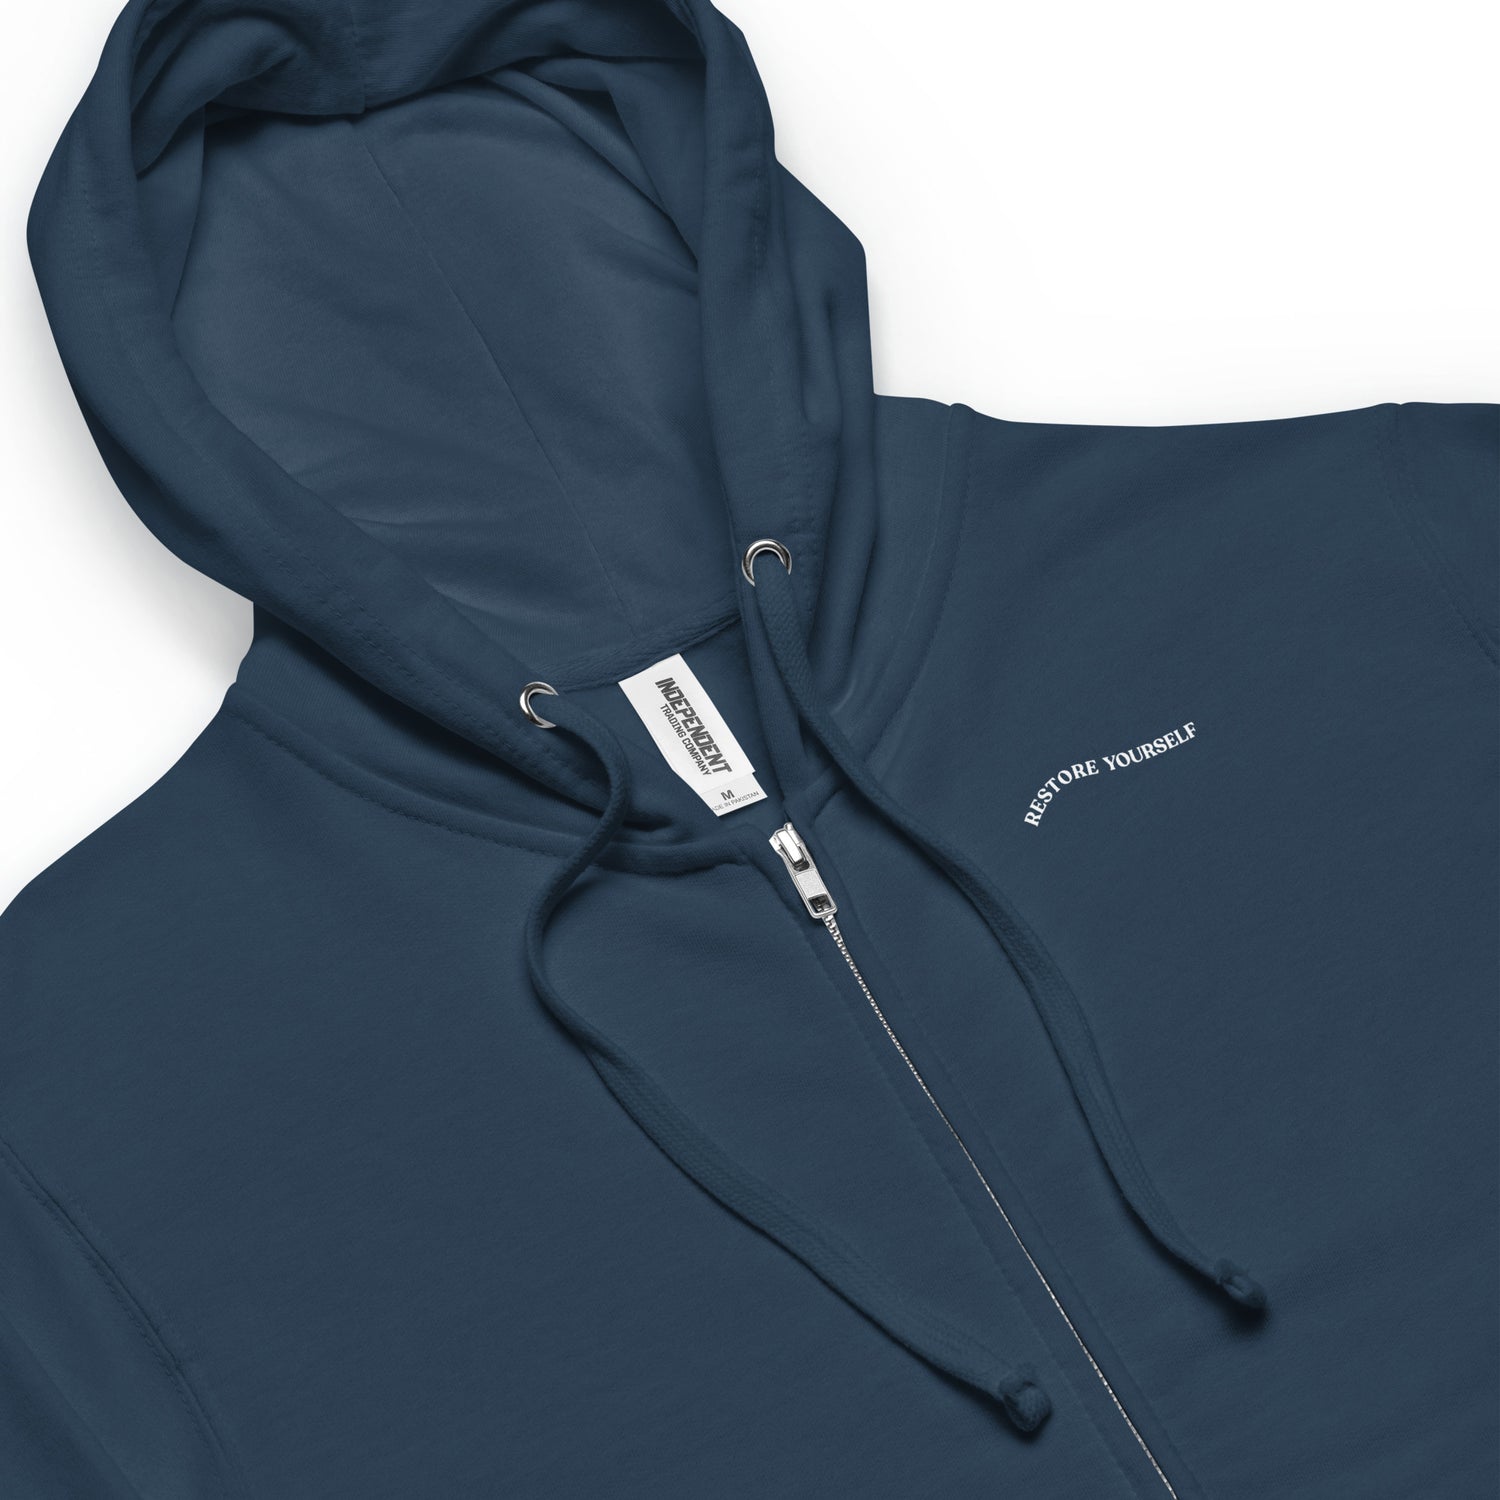 Close-up of a Navy zip-up hoodie featuring the empowering message "RESTORE YOURSELF" for mental health.